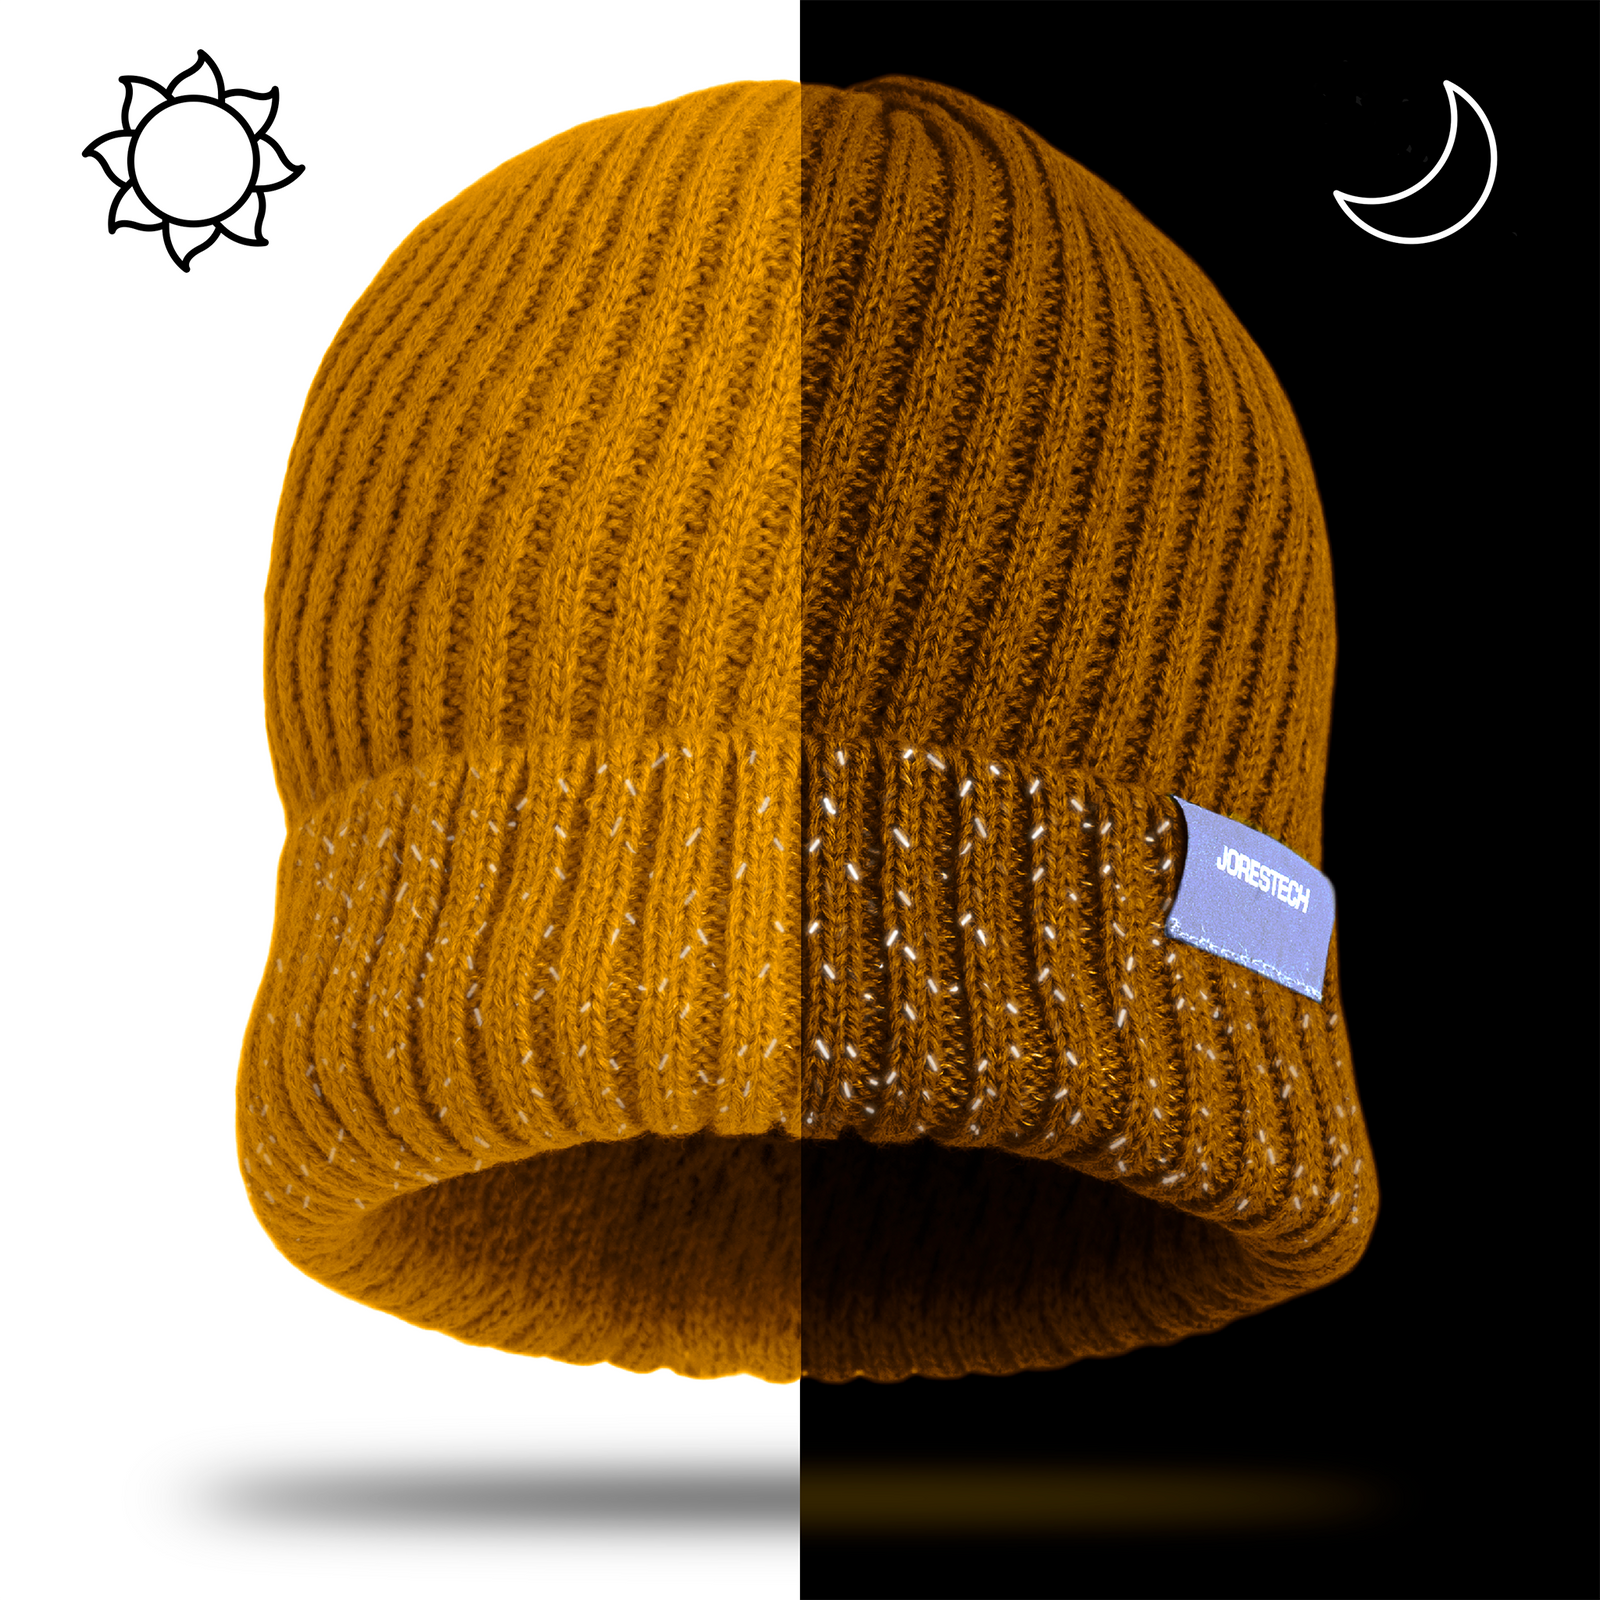 Comparison how does the reflective stitching look during day time and nighttime